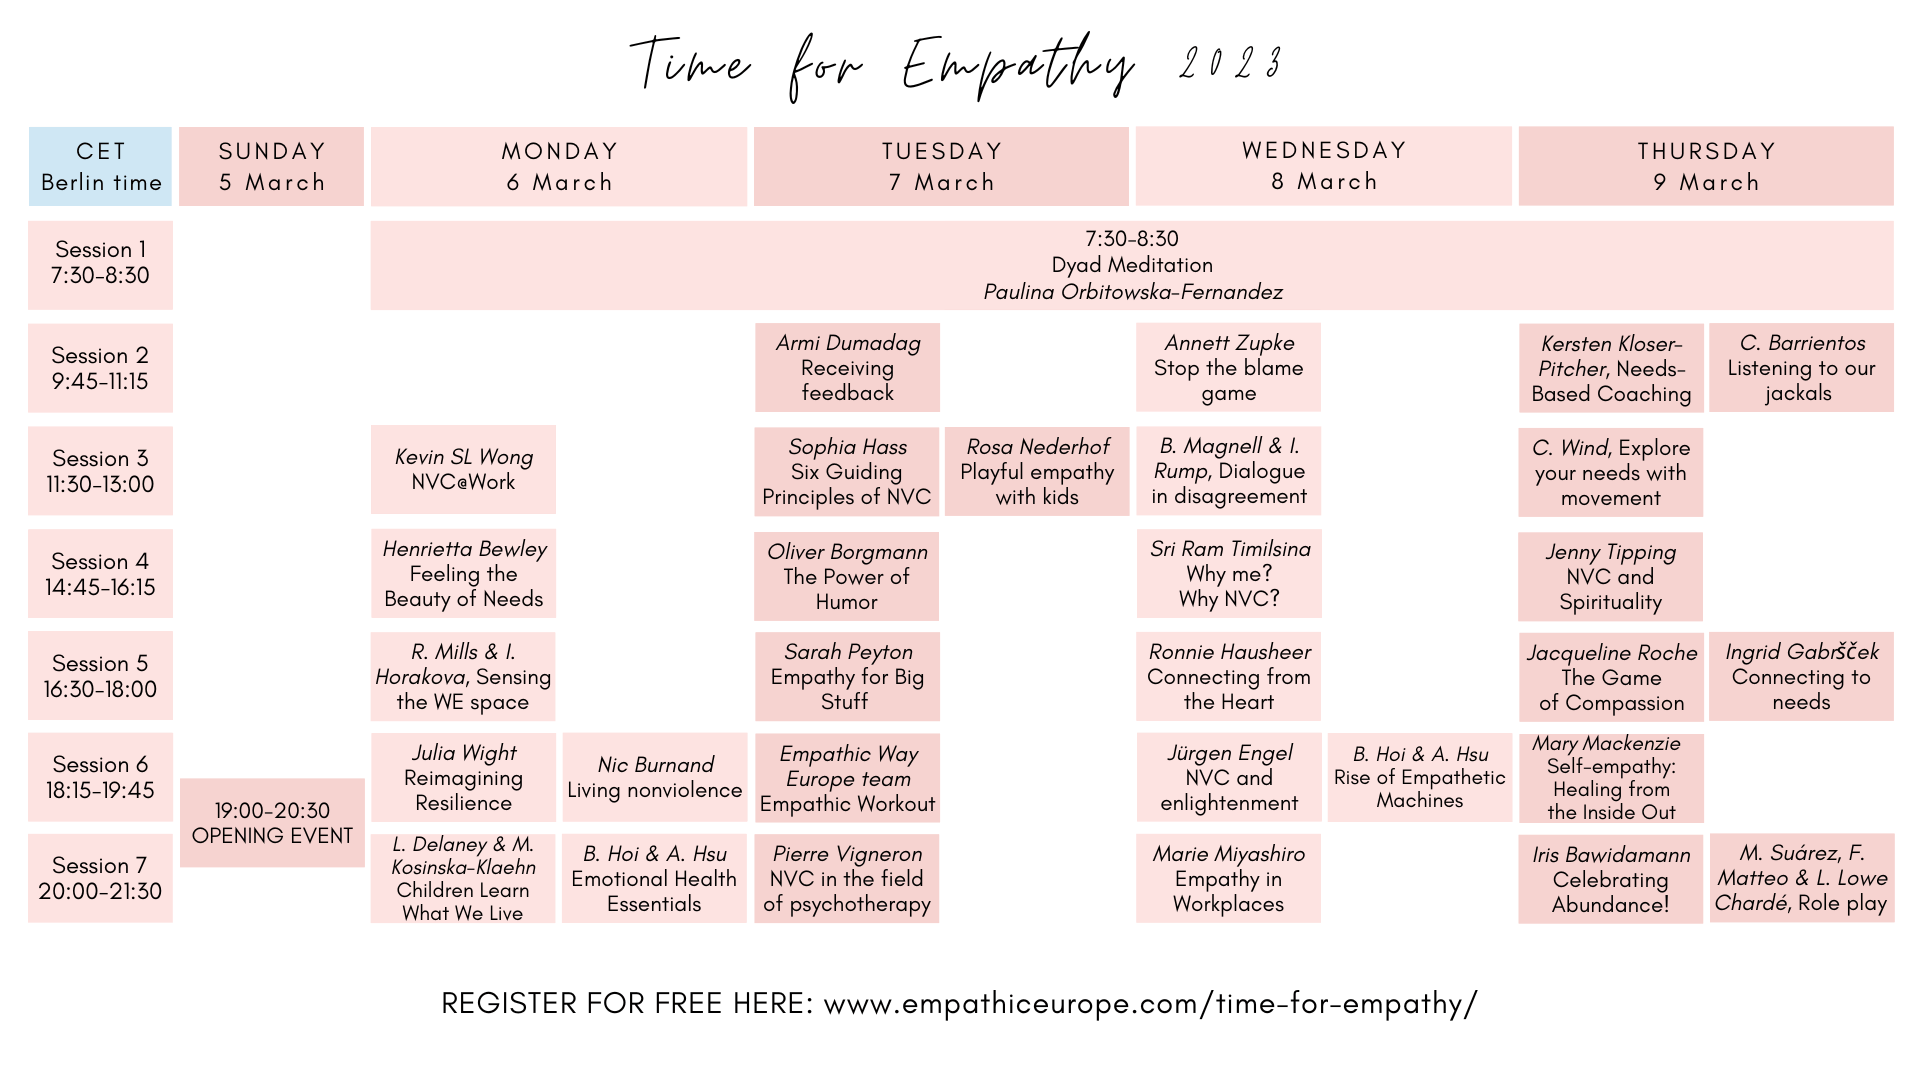 Time for Empathy 2023 programme